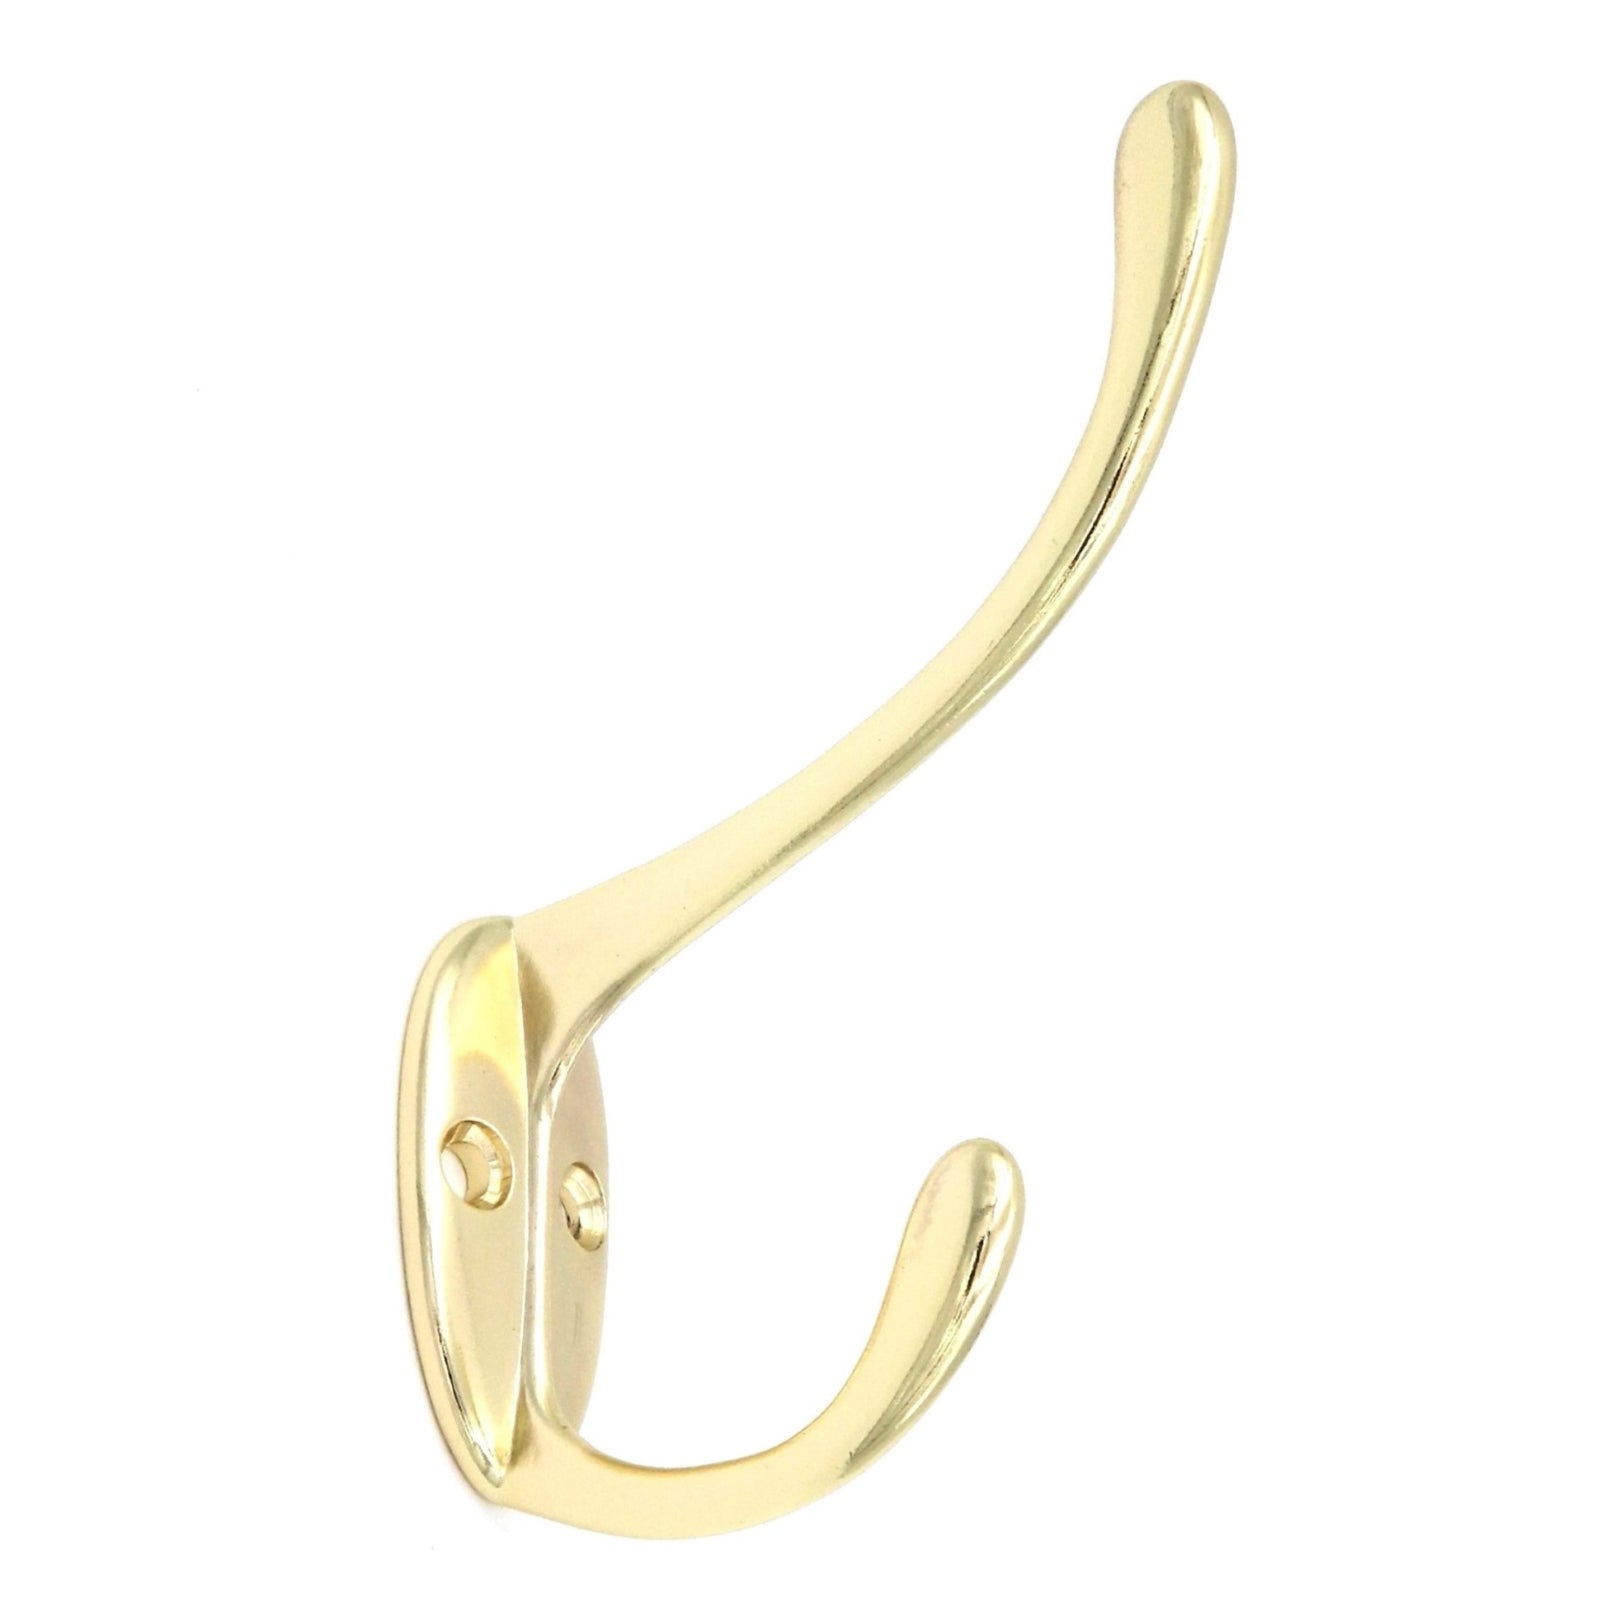 10 Pack Belwith Hickory Polished Brass Coat 1/2"cc Wall Door Double Hook P6900-3